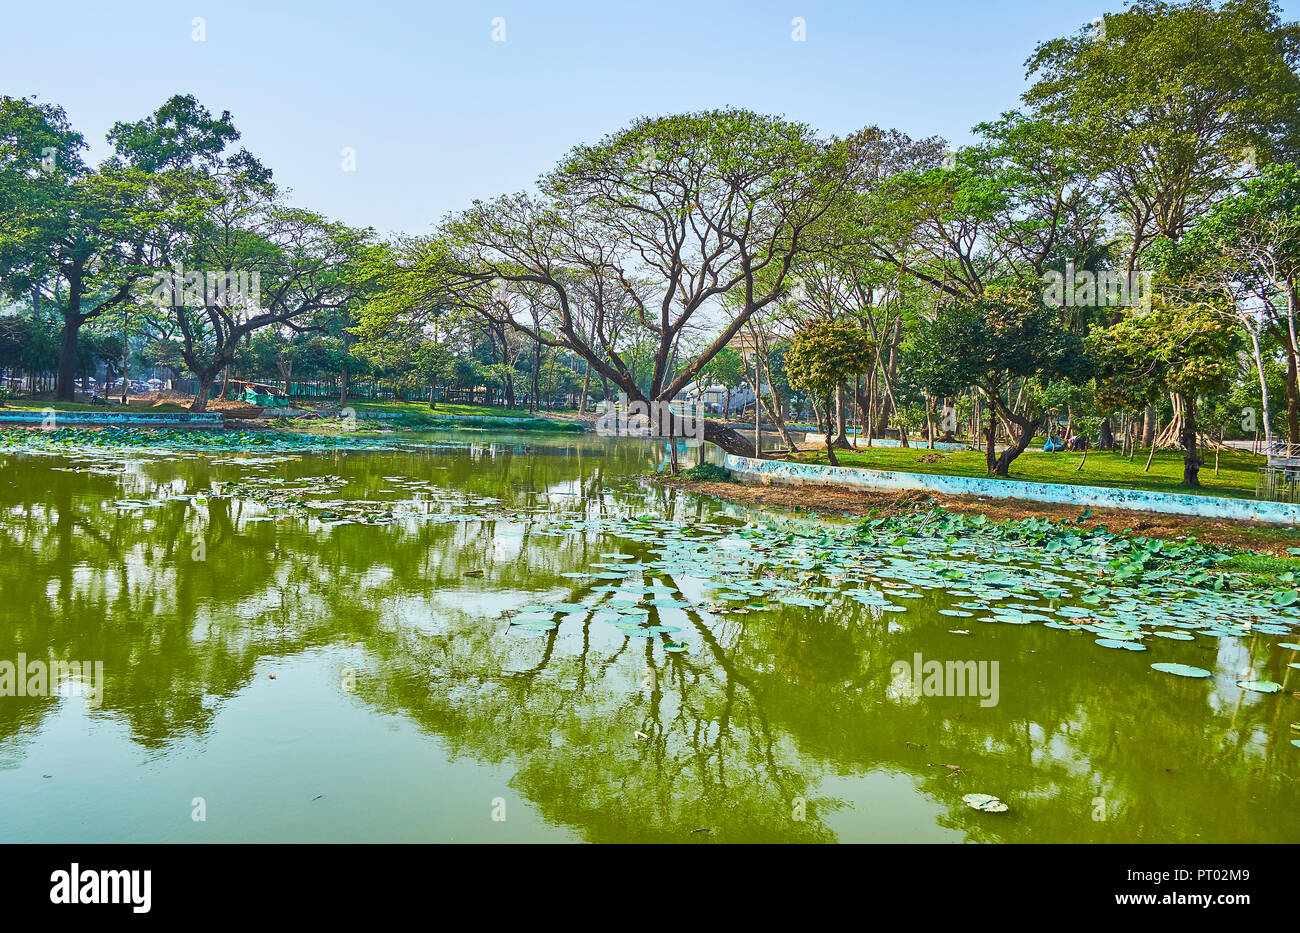 The lakeside Kandawgyi Park boasts the scenic views with sprawling trees, juicy lawn and lotus plants on the water surface, Bahan township, Yangon, My Stock Photo